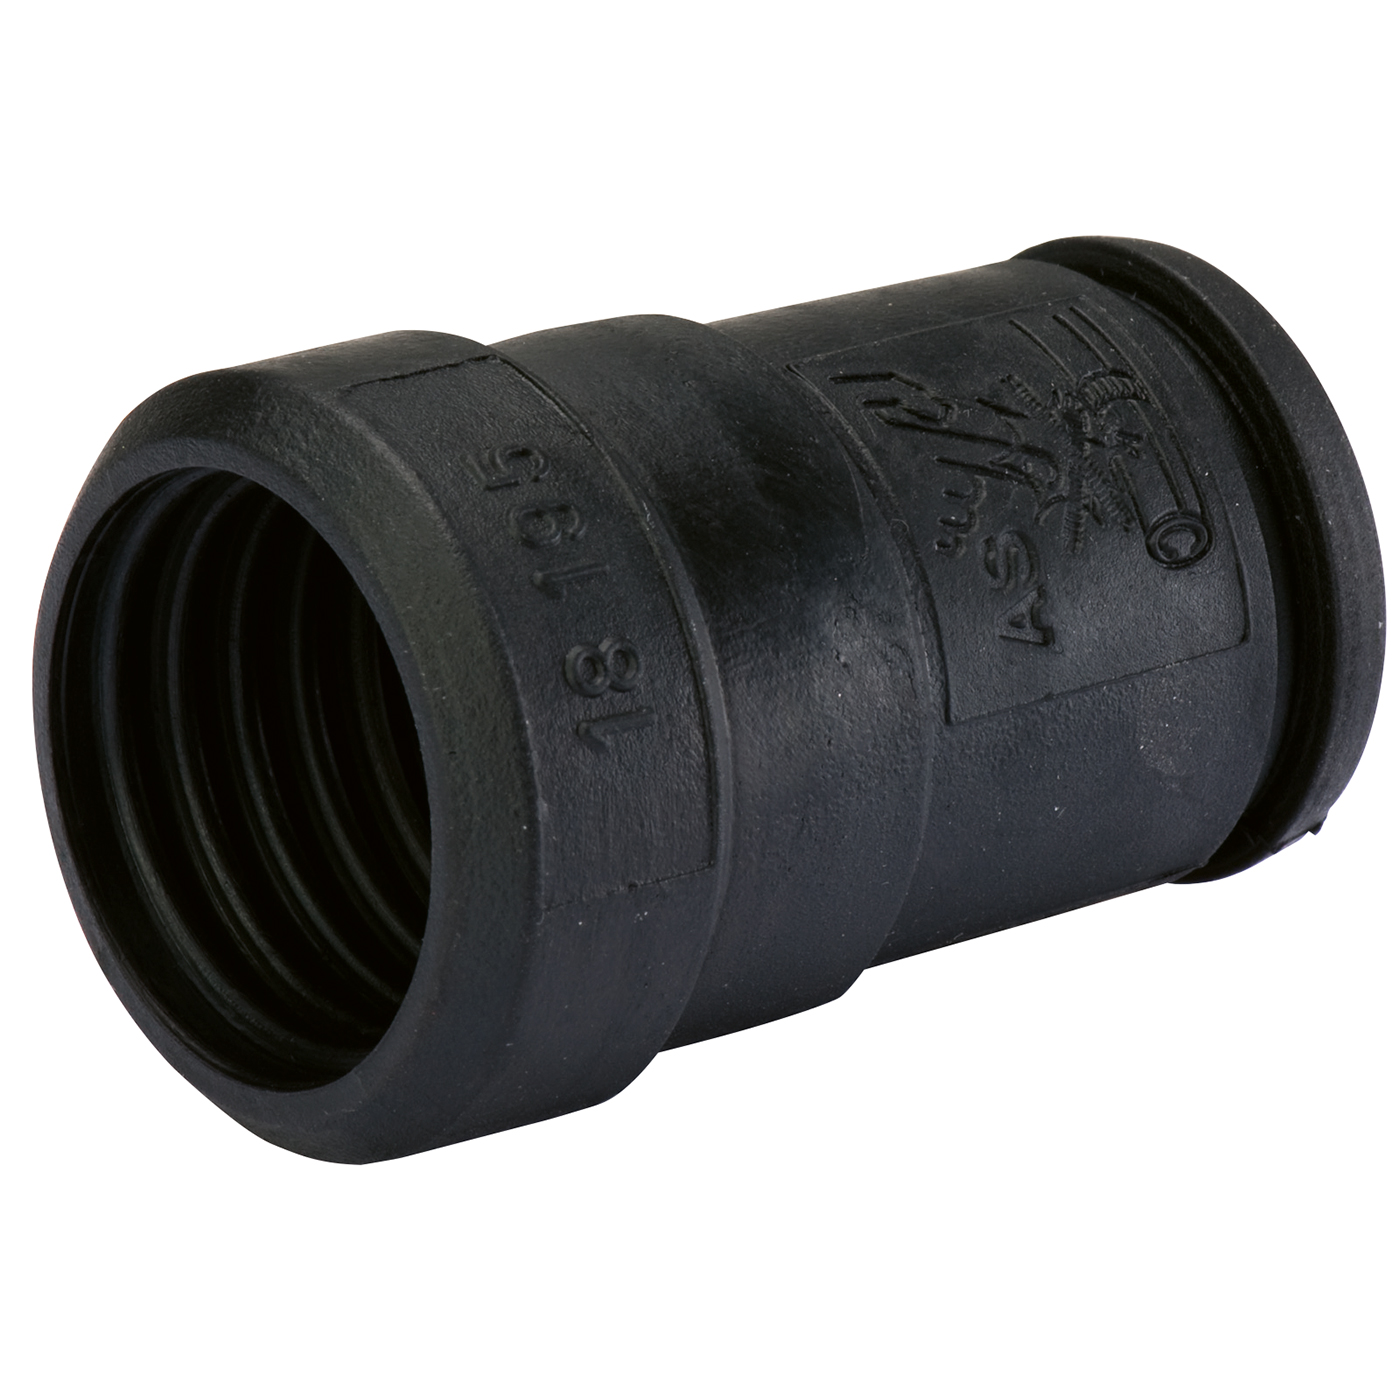 Universal Socket for Suction Hose, ø 27 mm, for FINO DUSTEX - 1 piece